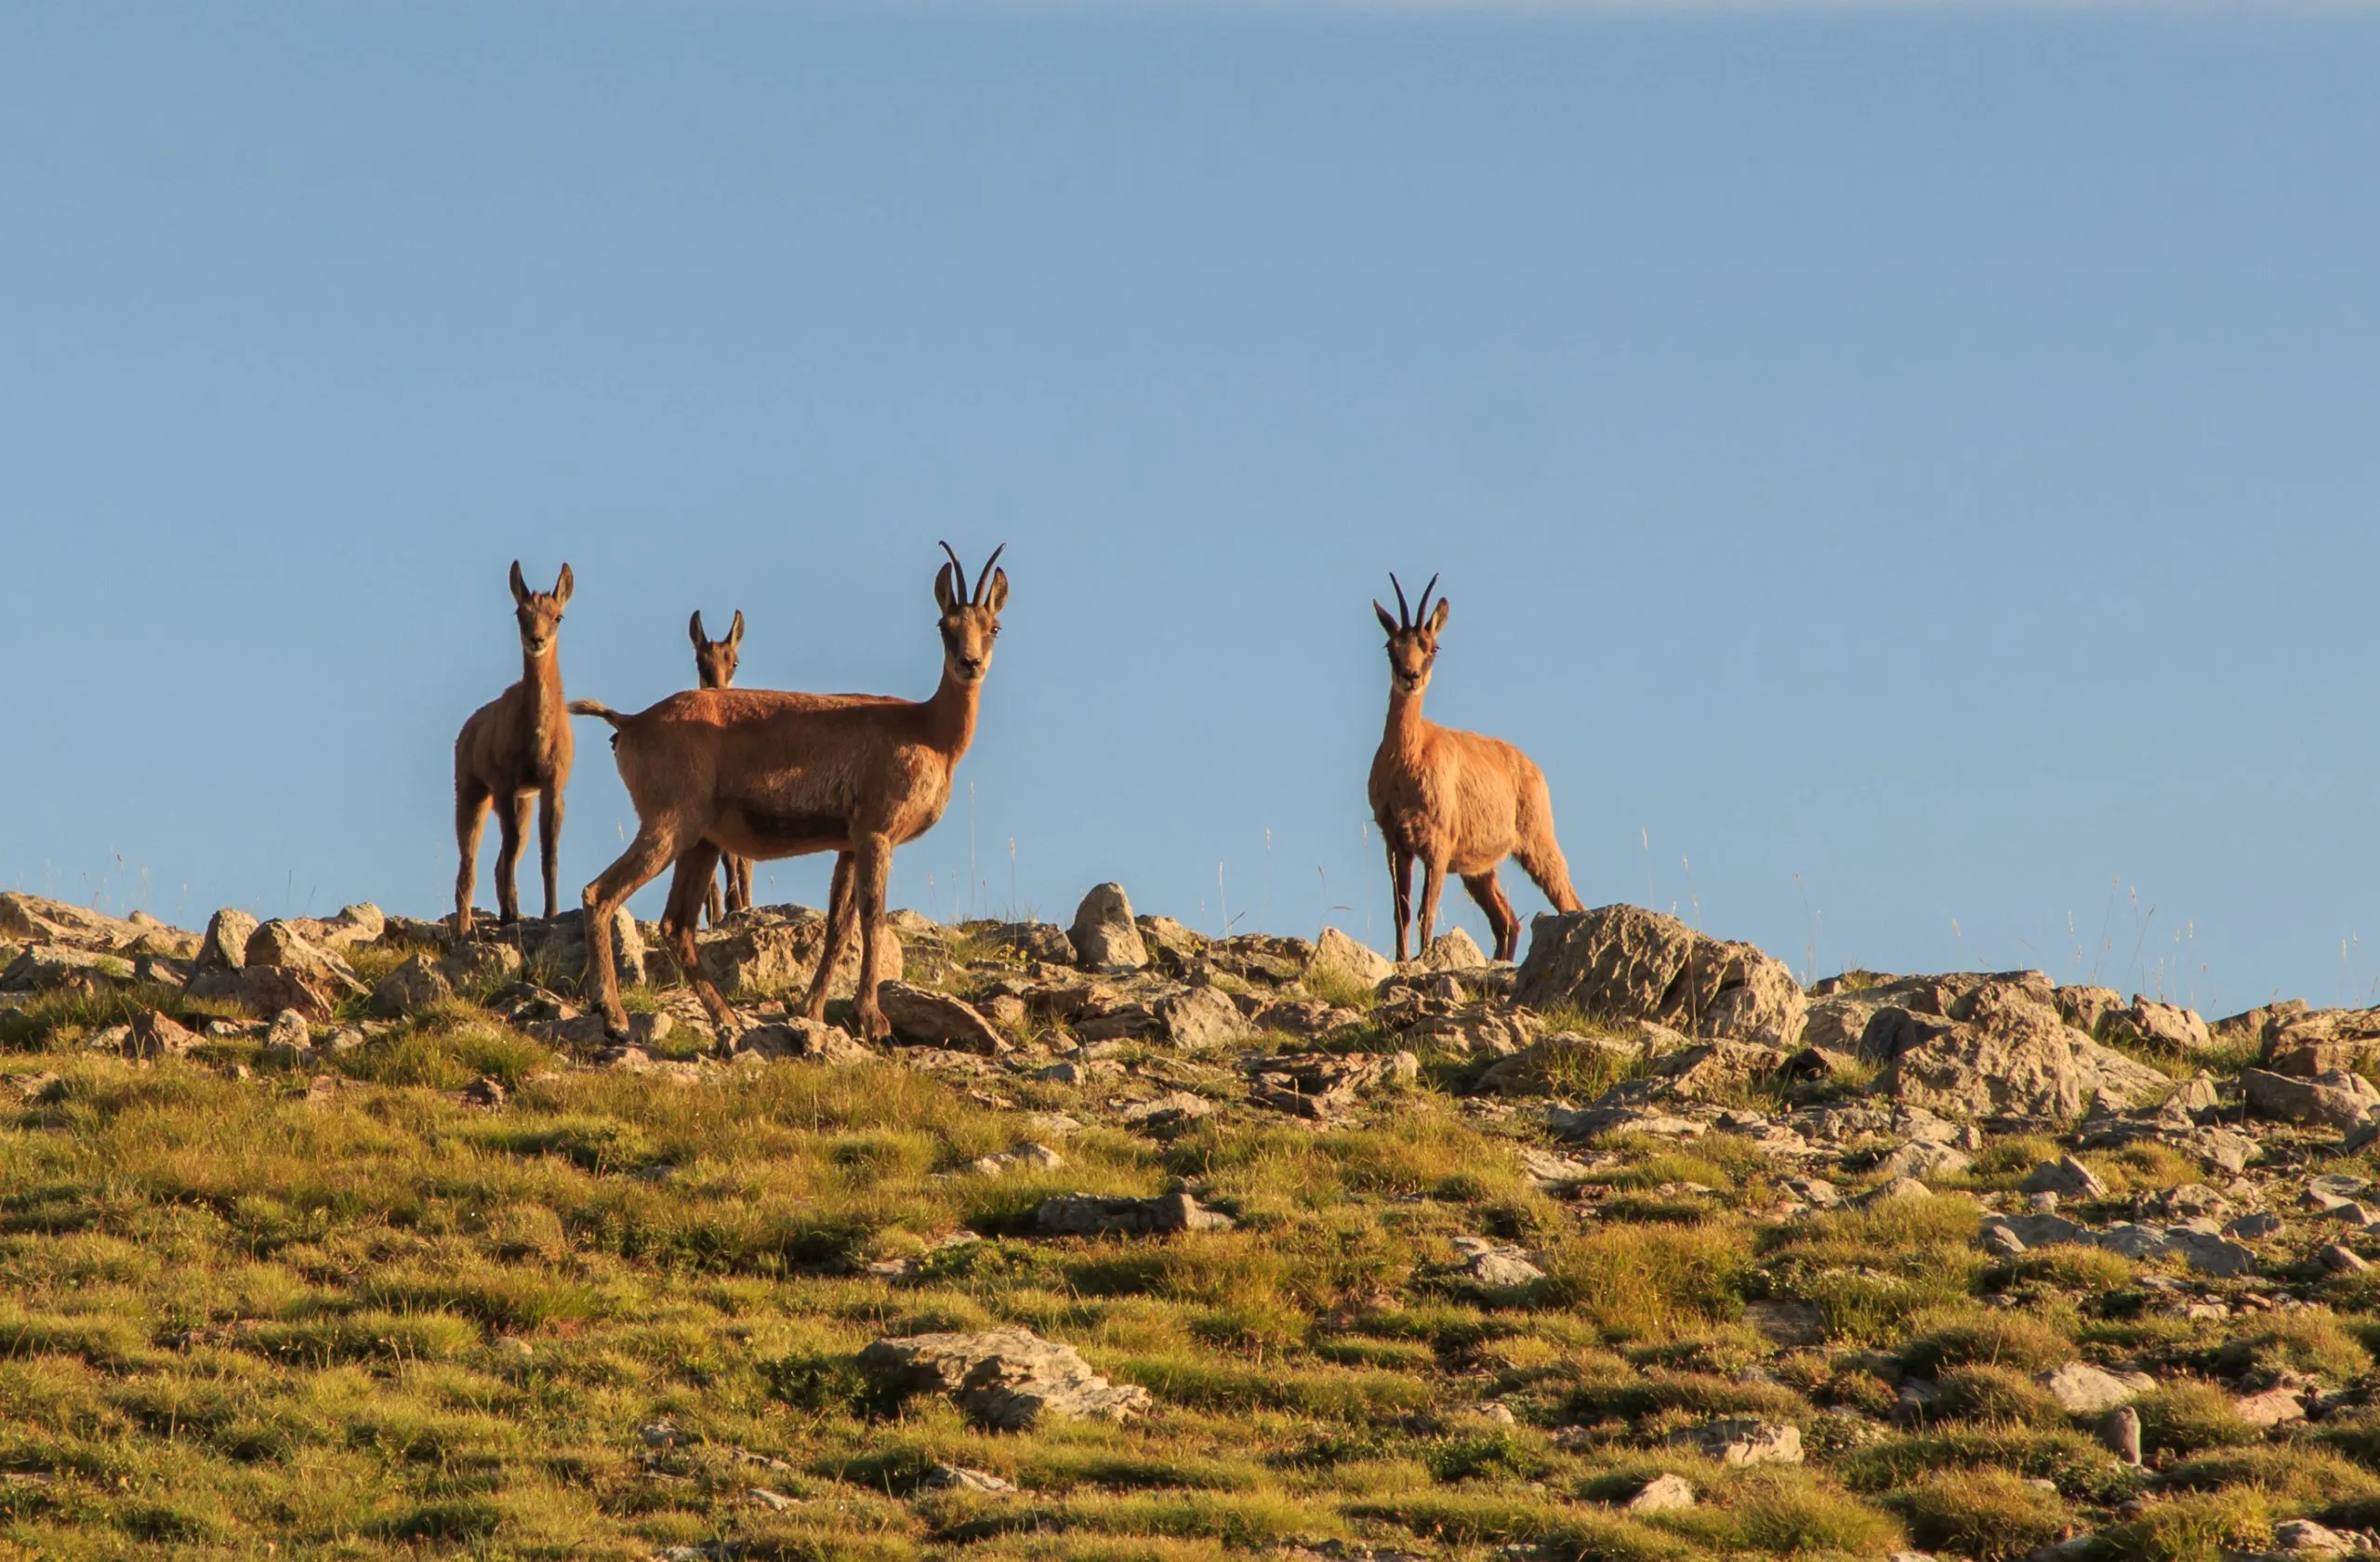 Family of 4 chamois looking on the mountain.Fauna concept